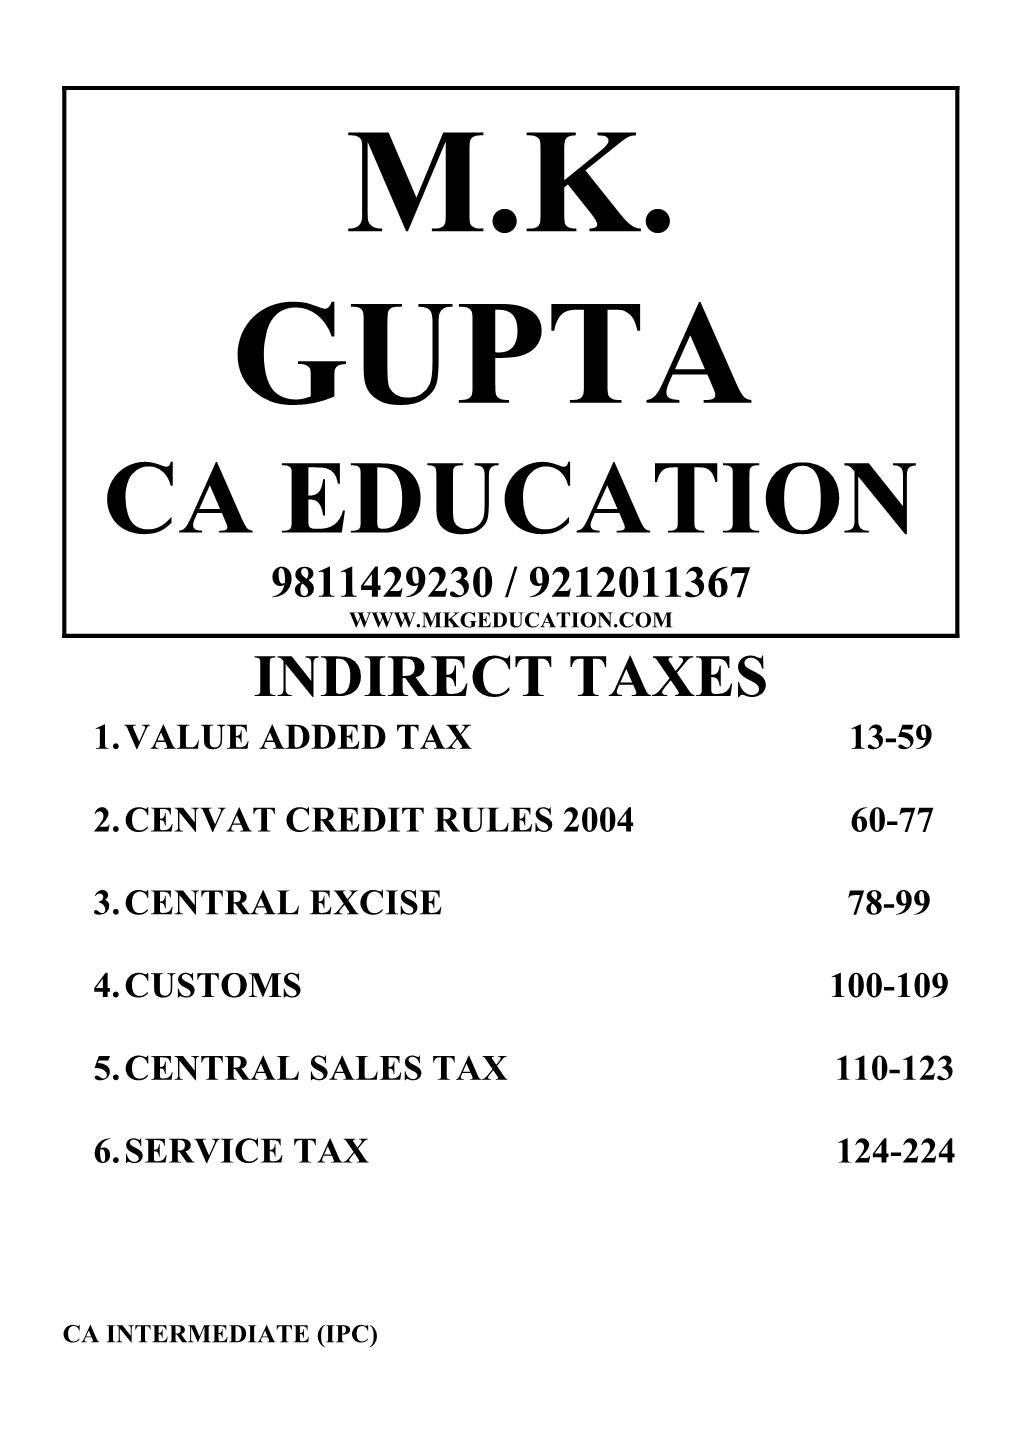 Question 1: Explain Direct Tax And Indirect Tax